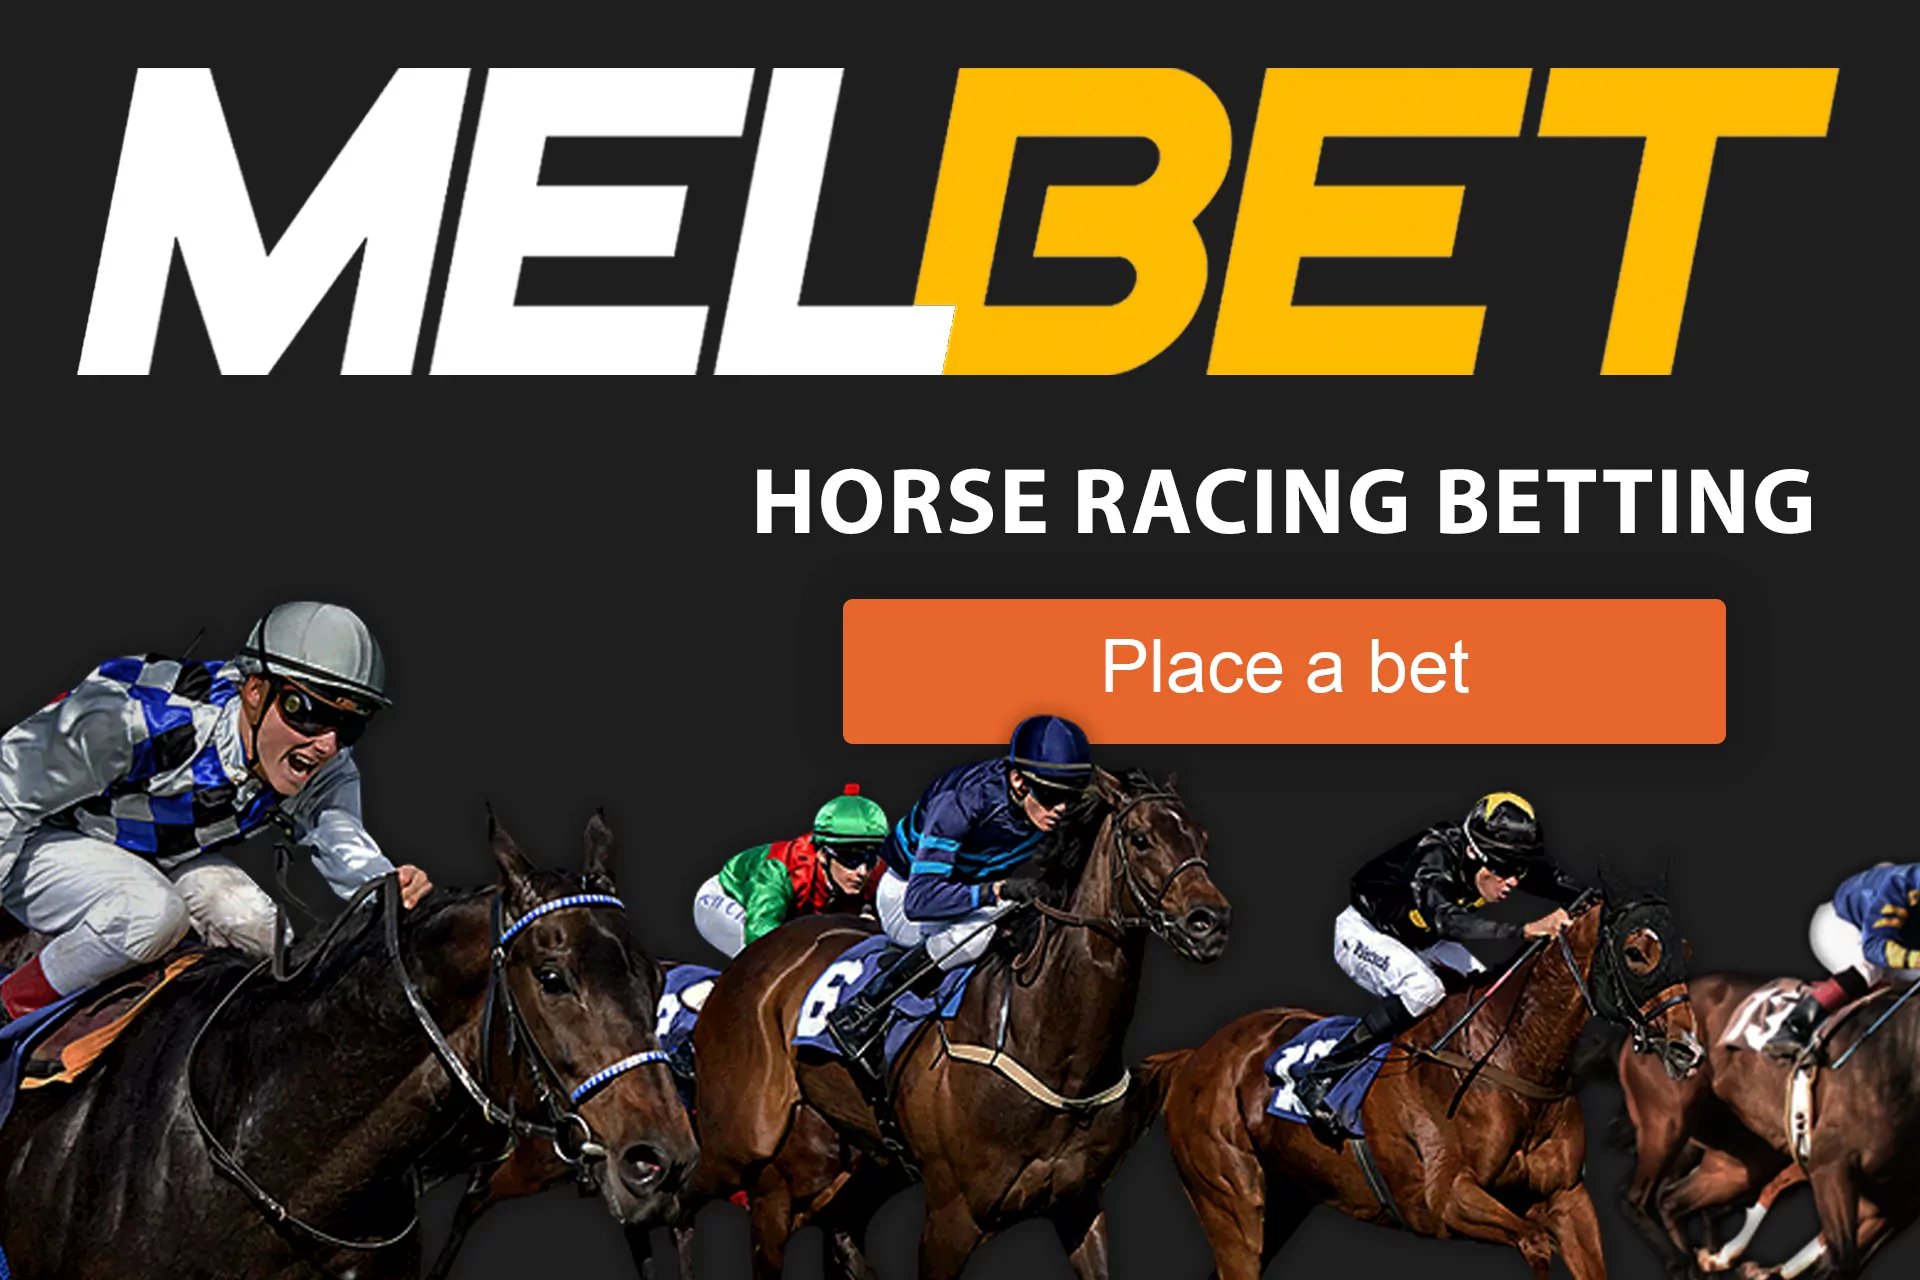 If you like horse racing, look for an event at Melbet.